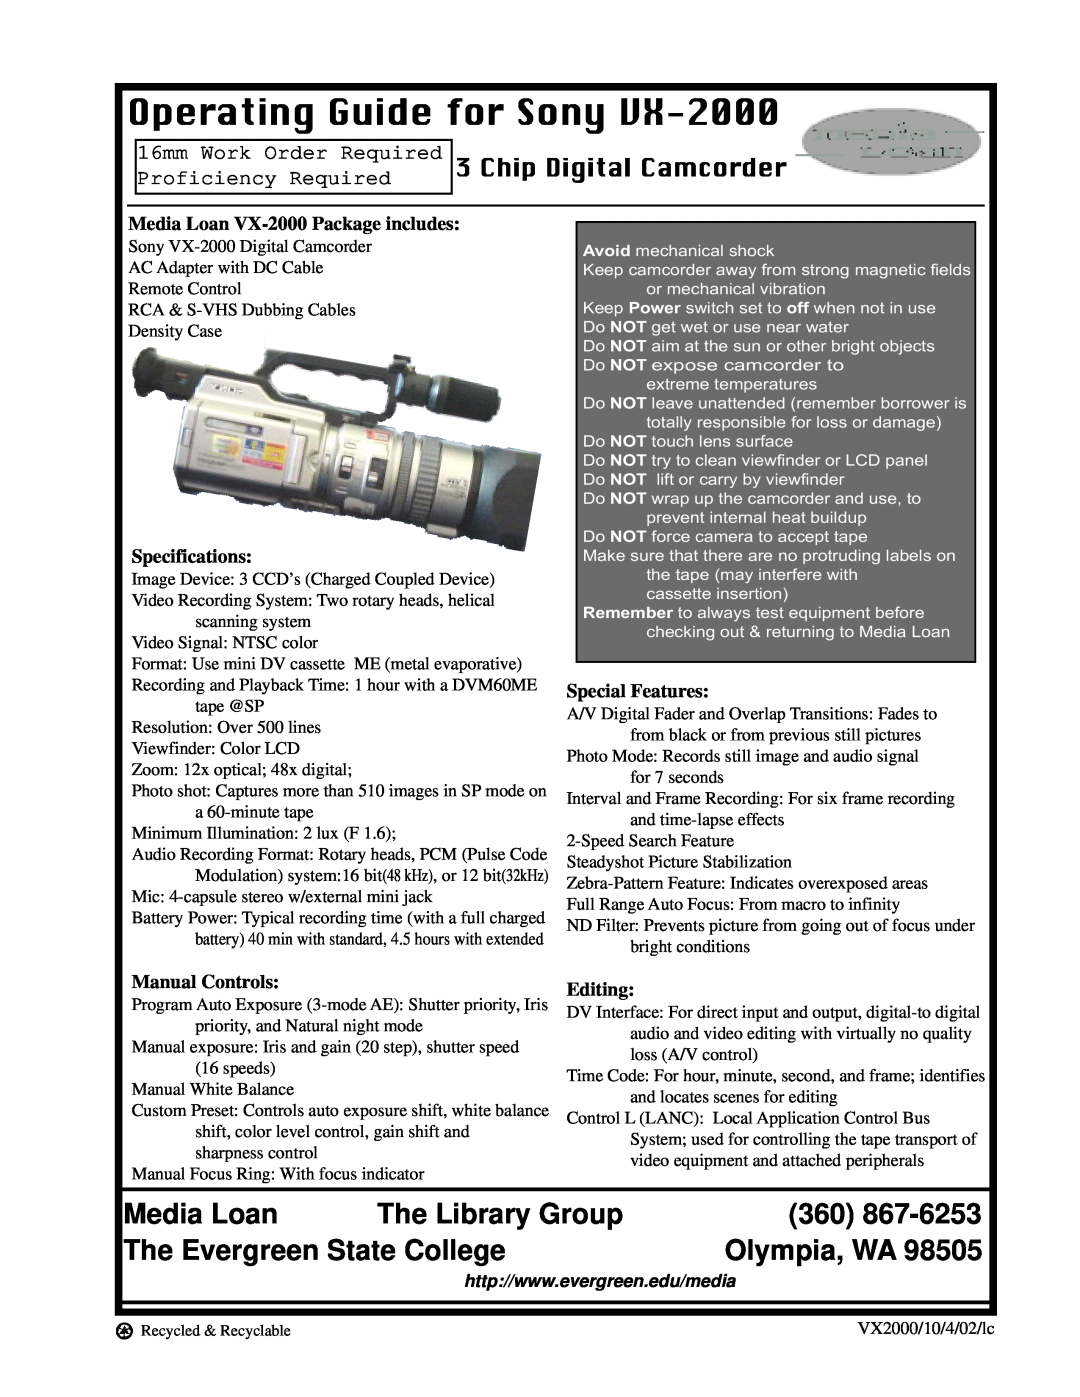 Sony VX-2000 specifications Chip Digital Camcorder, Operating Guide for Sony, Media Loan, Olympia, WA, Specifications 